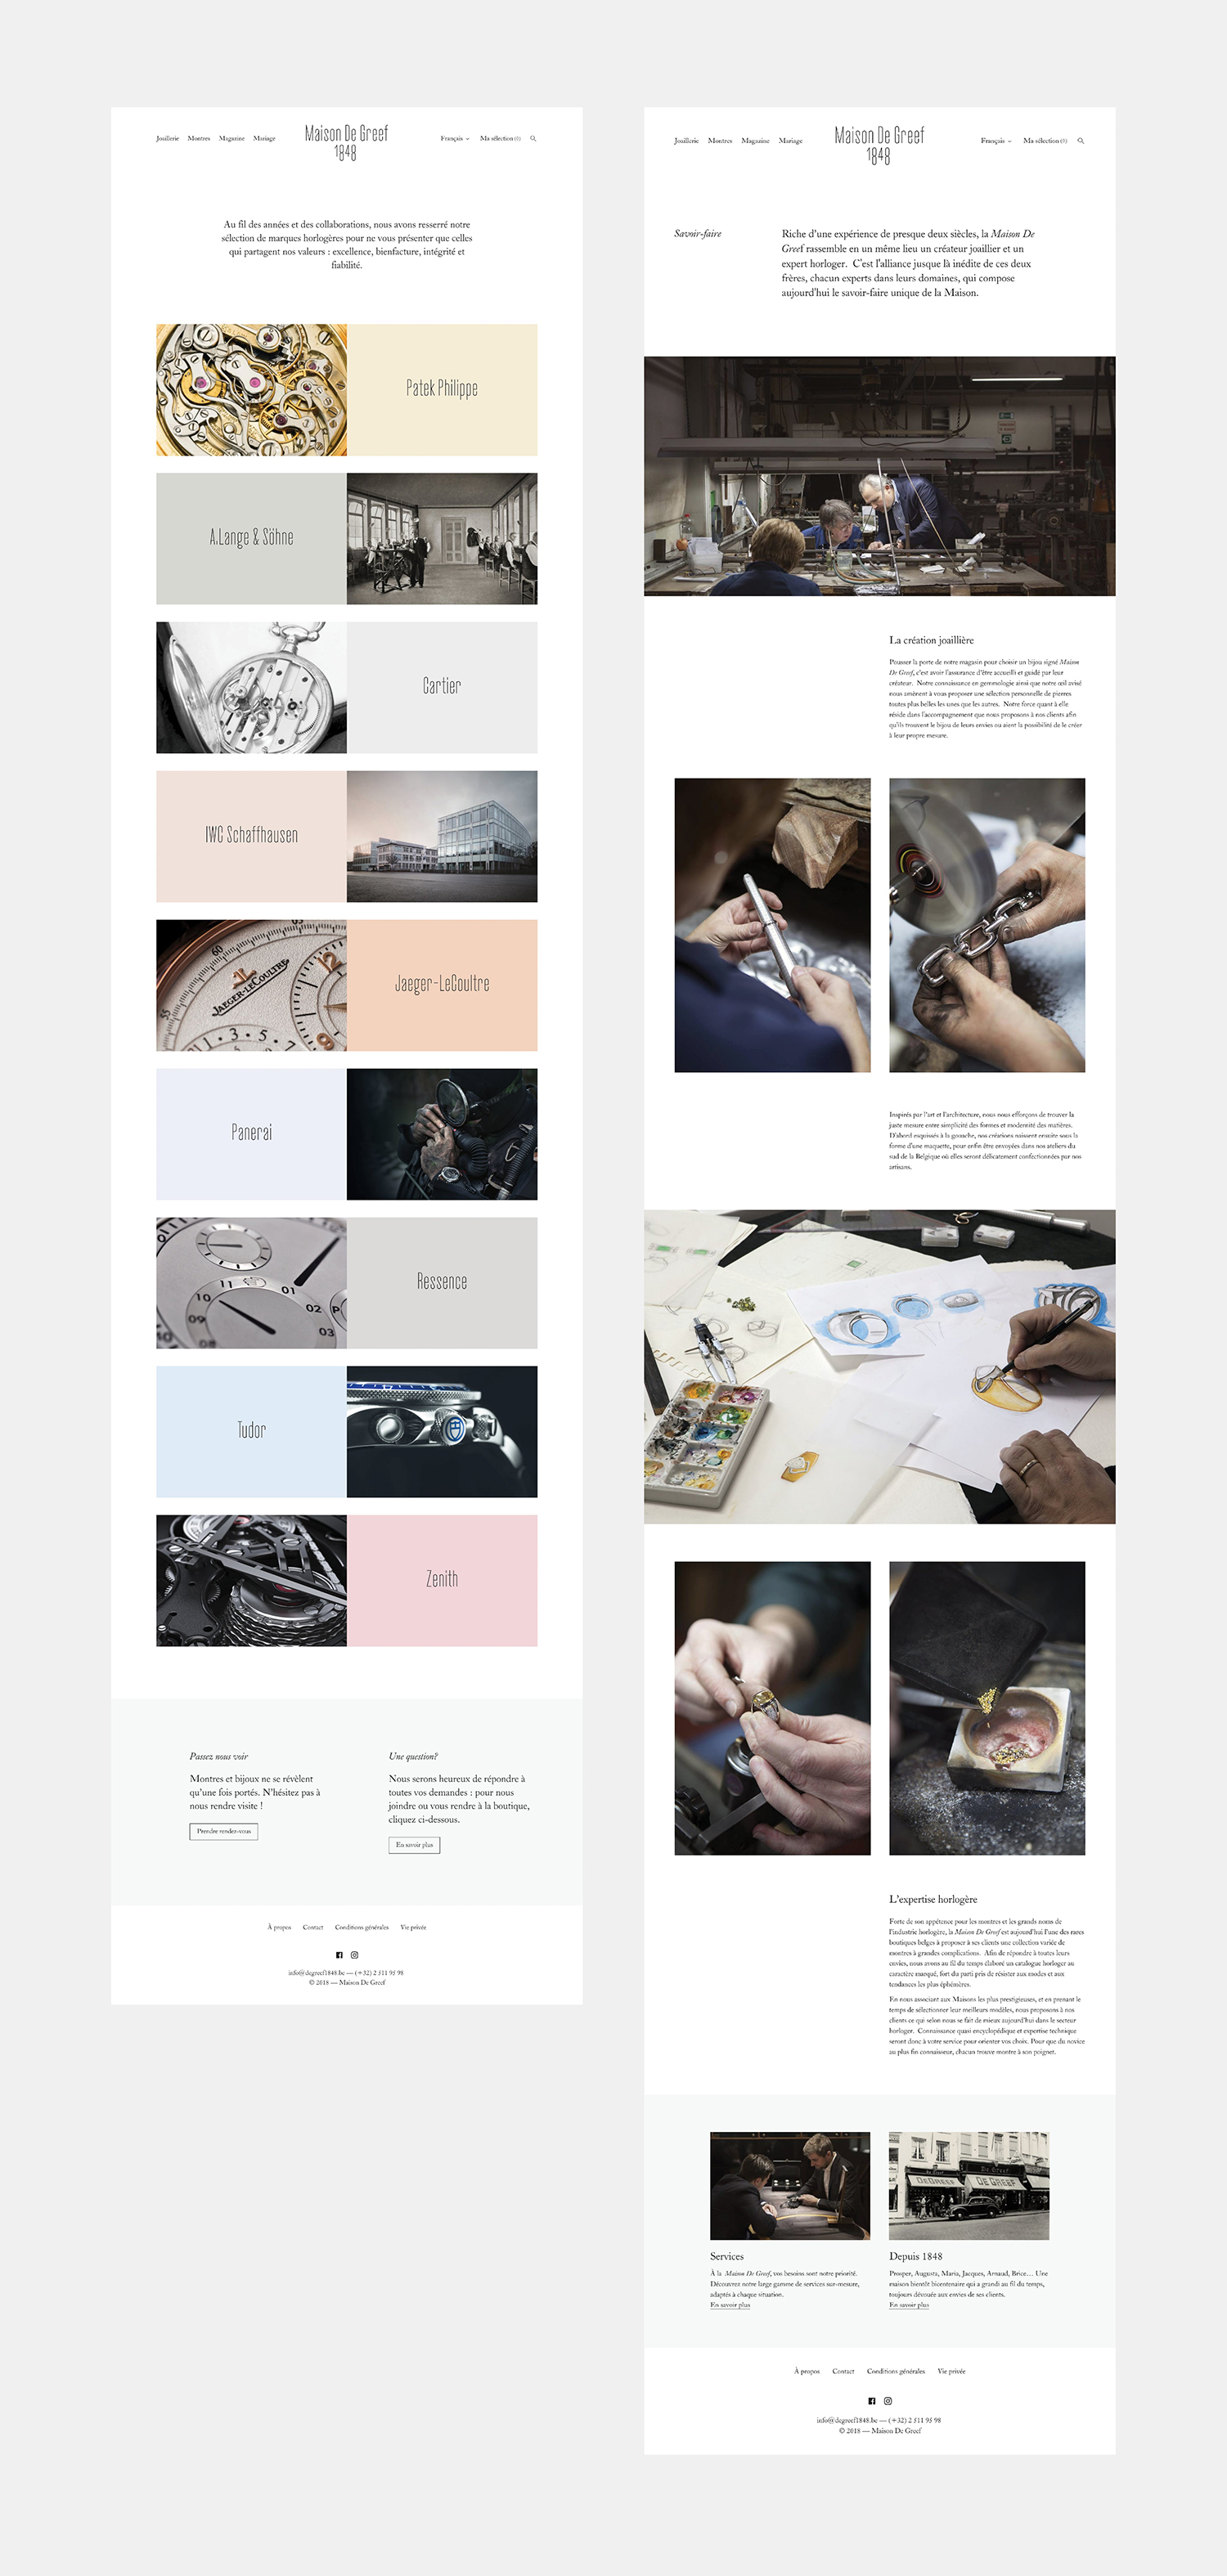 Website by Base Design for high-end jewellery brand, expert watchmaker and retailer Maison De Greef 1848